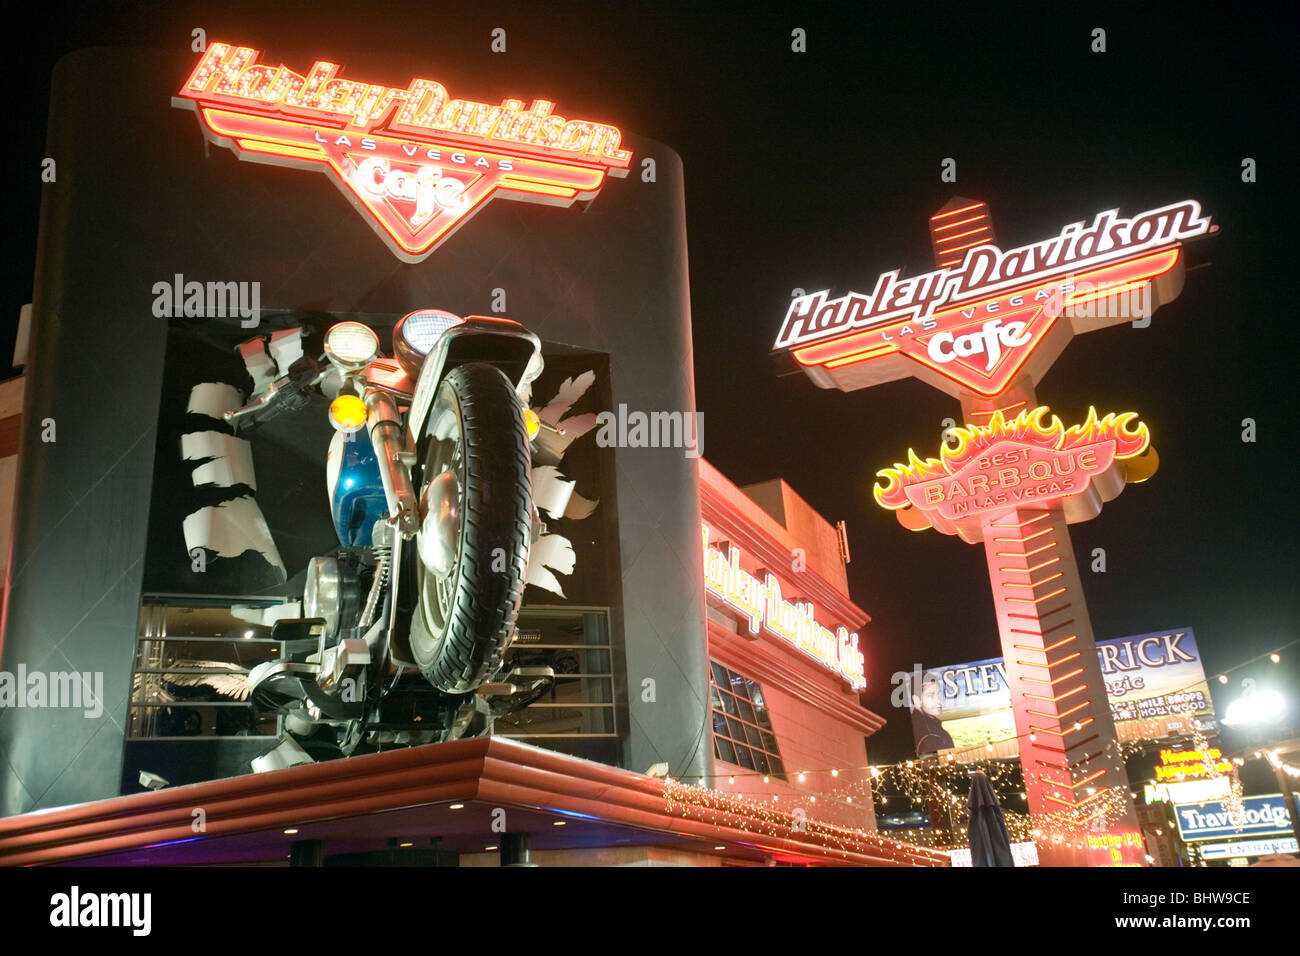 A view of the Harley Davidson Cafe in Las Vegas, Nevada. Stock Photo